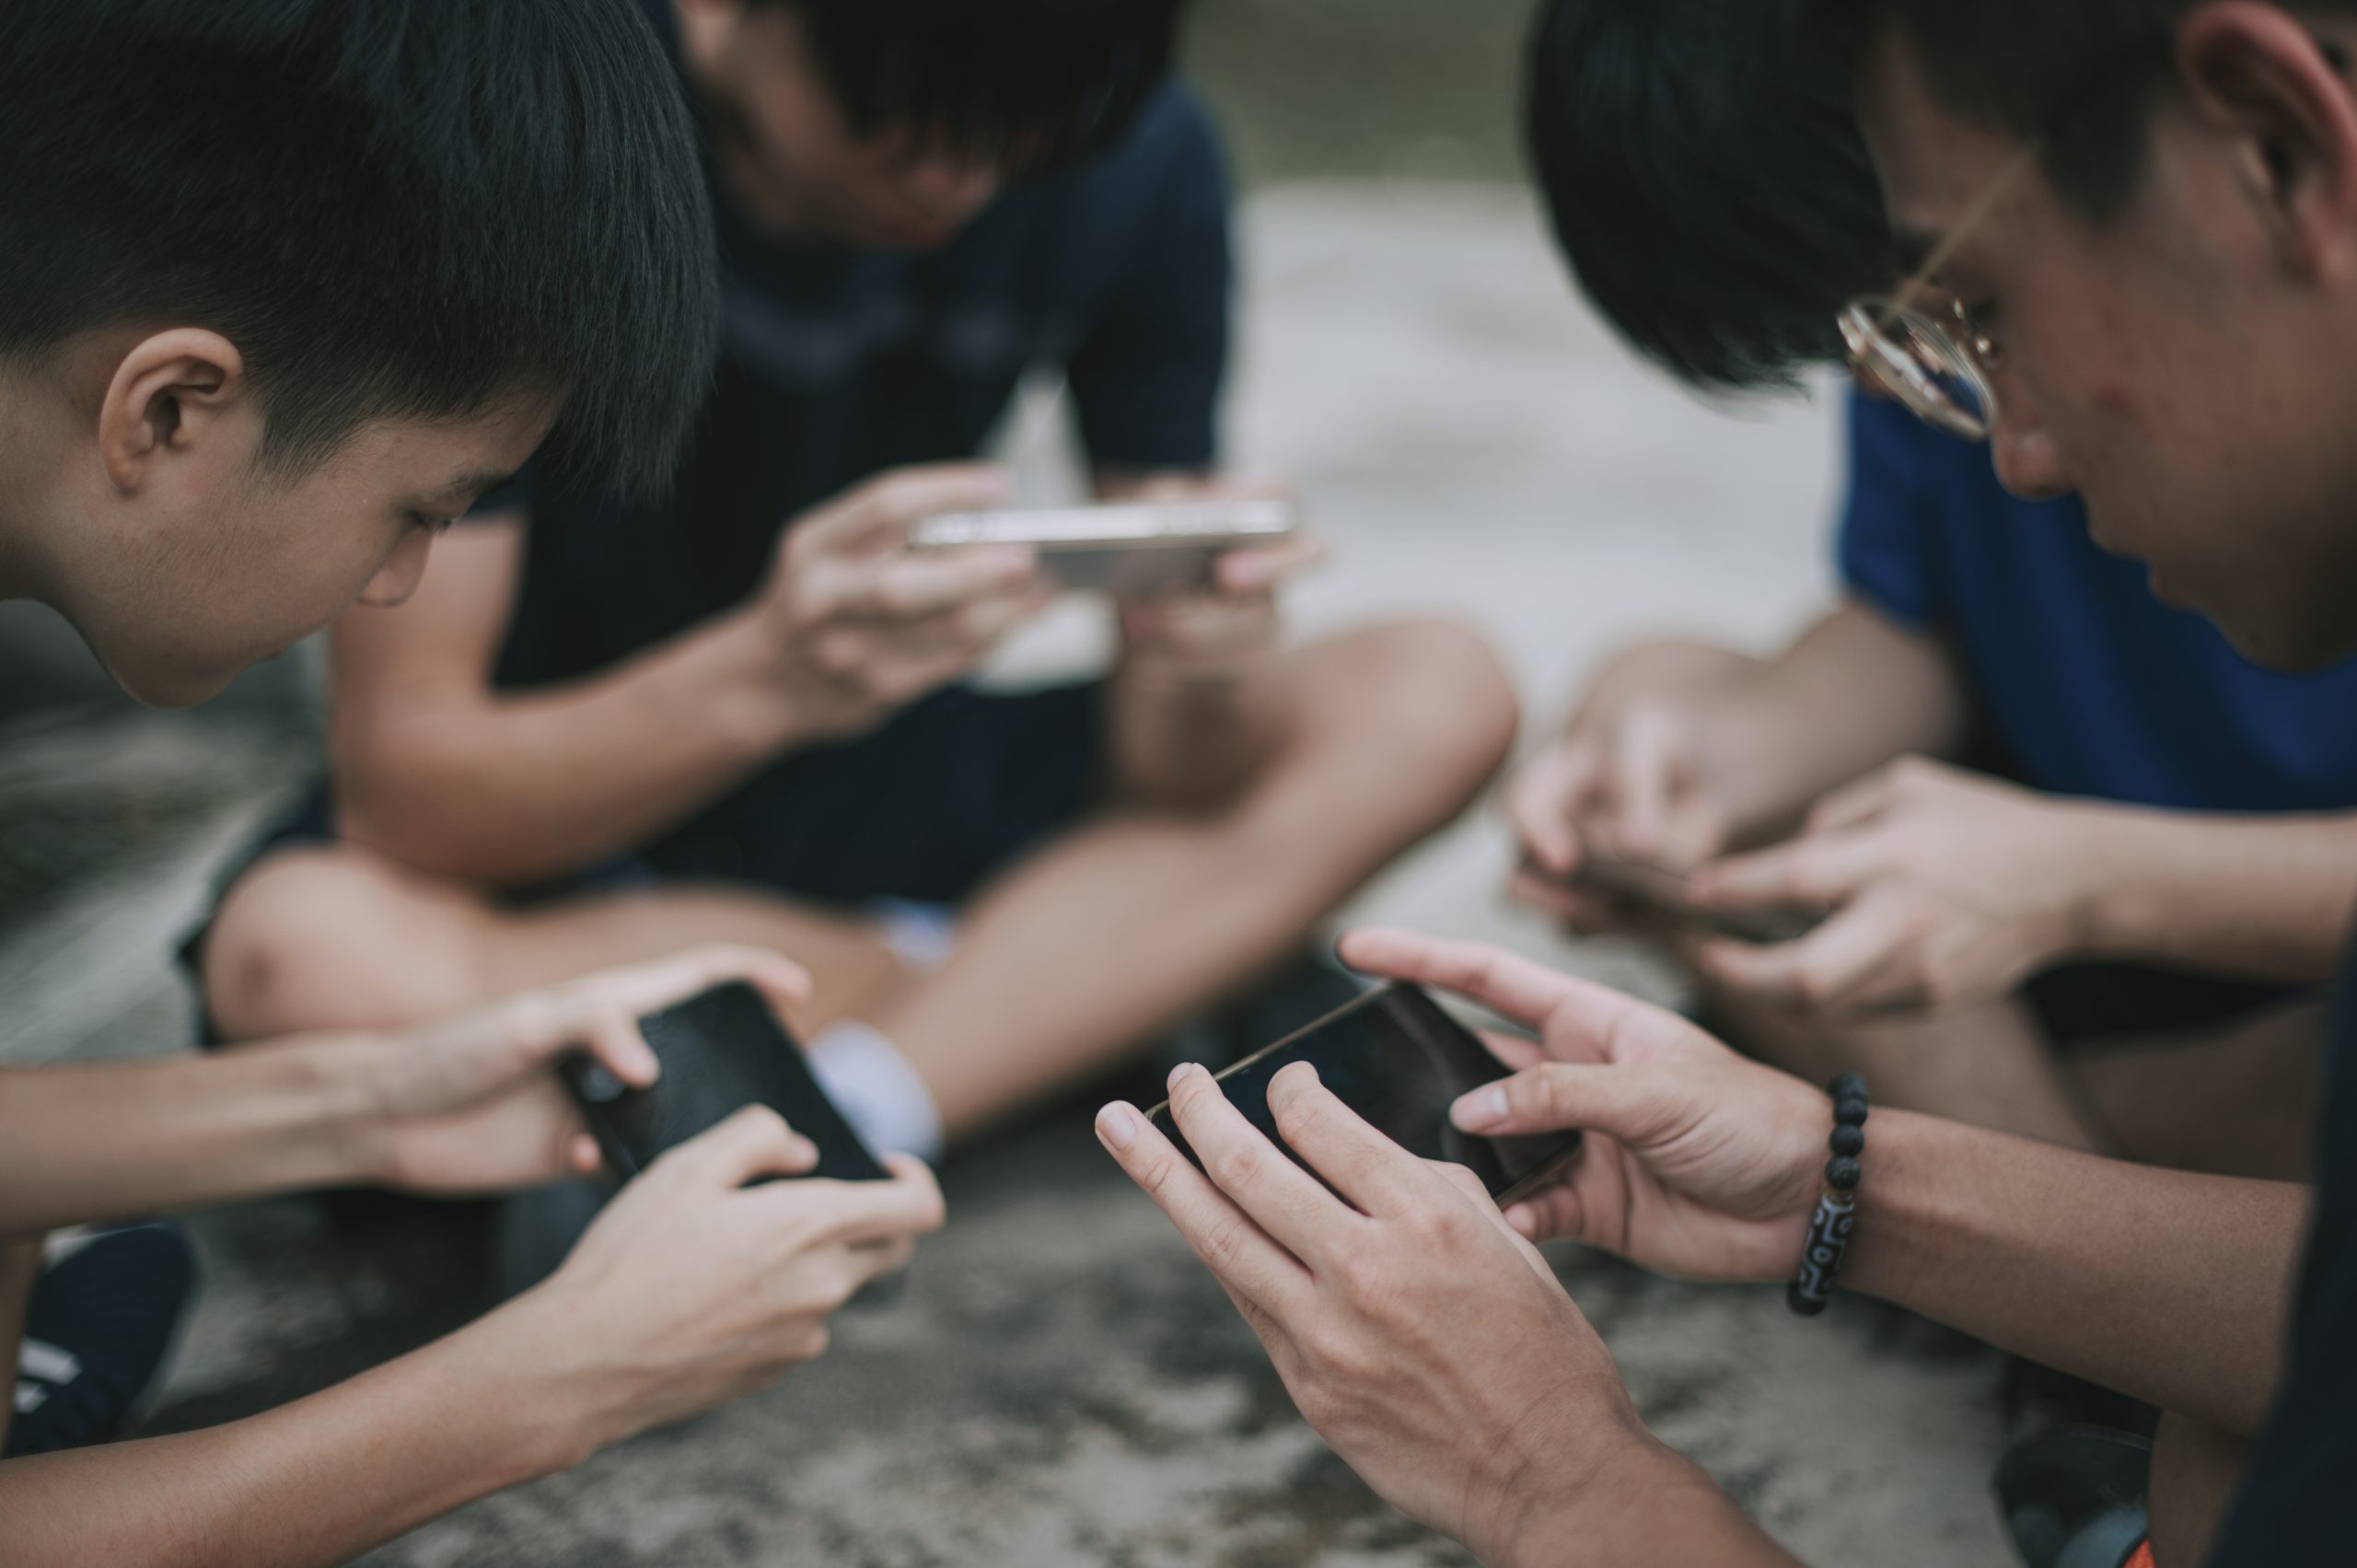 An Asian Chinese Group Of Teenage Boys Playing Mobile Game In The Basketball Court After School Using Phone Generation Z